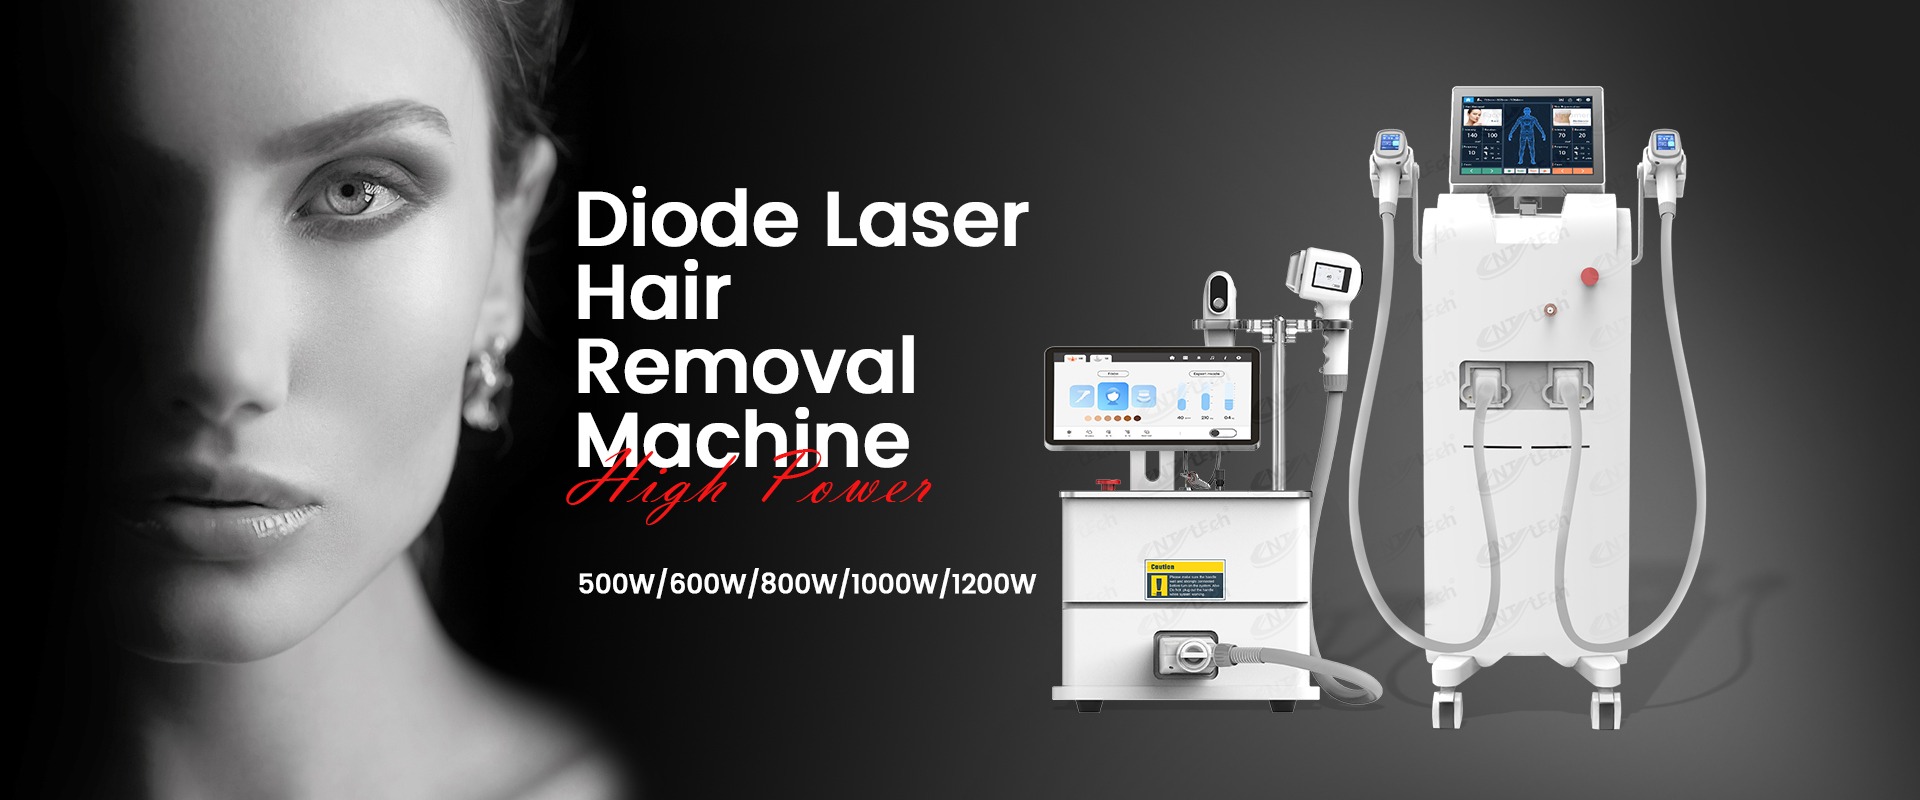 Understanding the Working Theory of Diode Laser Hair Removal Machines